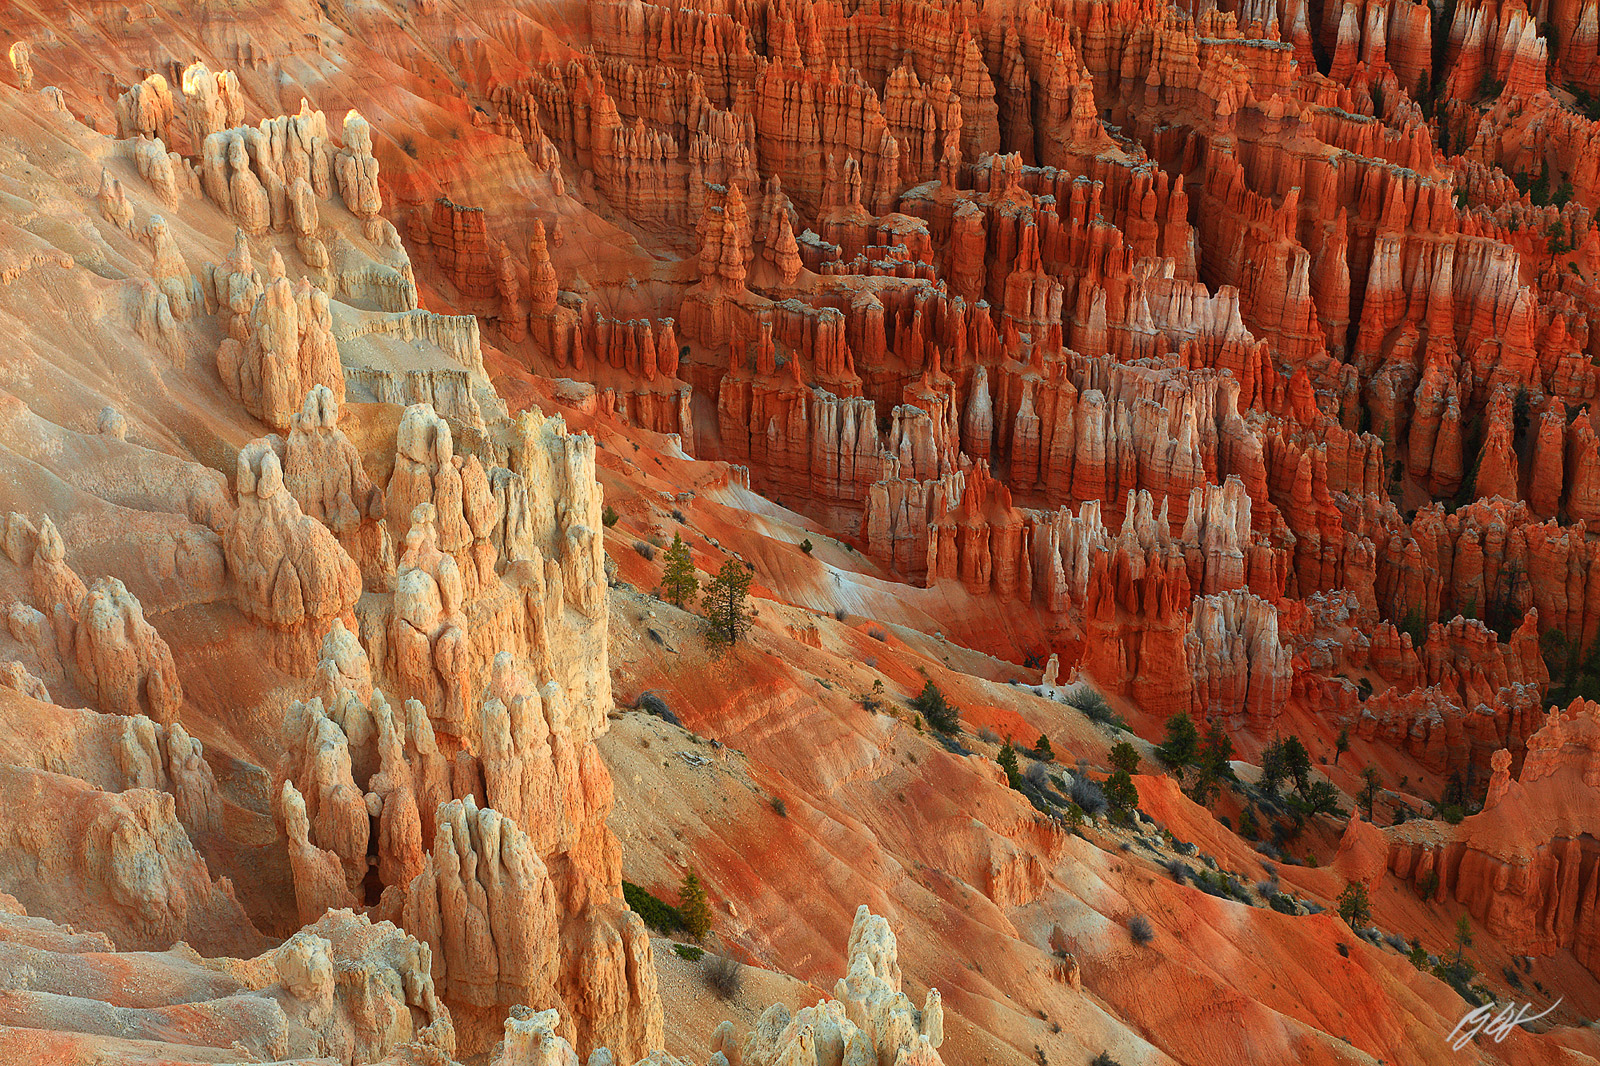 Hoodoo Formations from Inspiration point in Bryce Canyon National Park in Utah